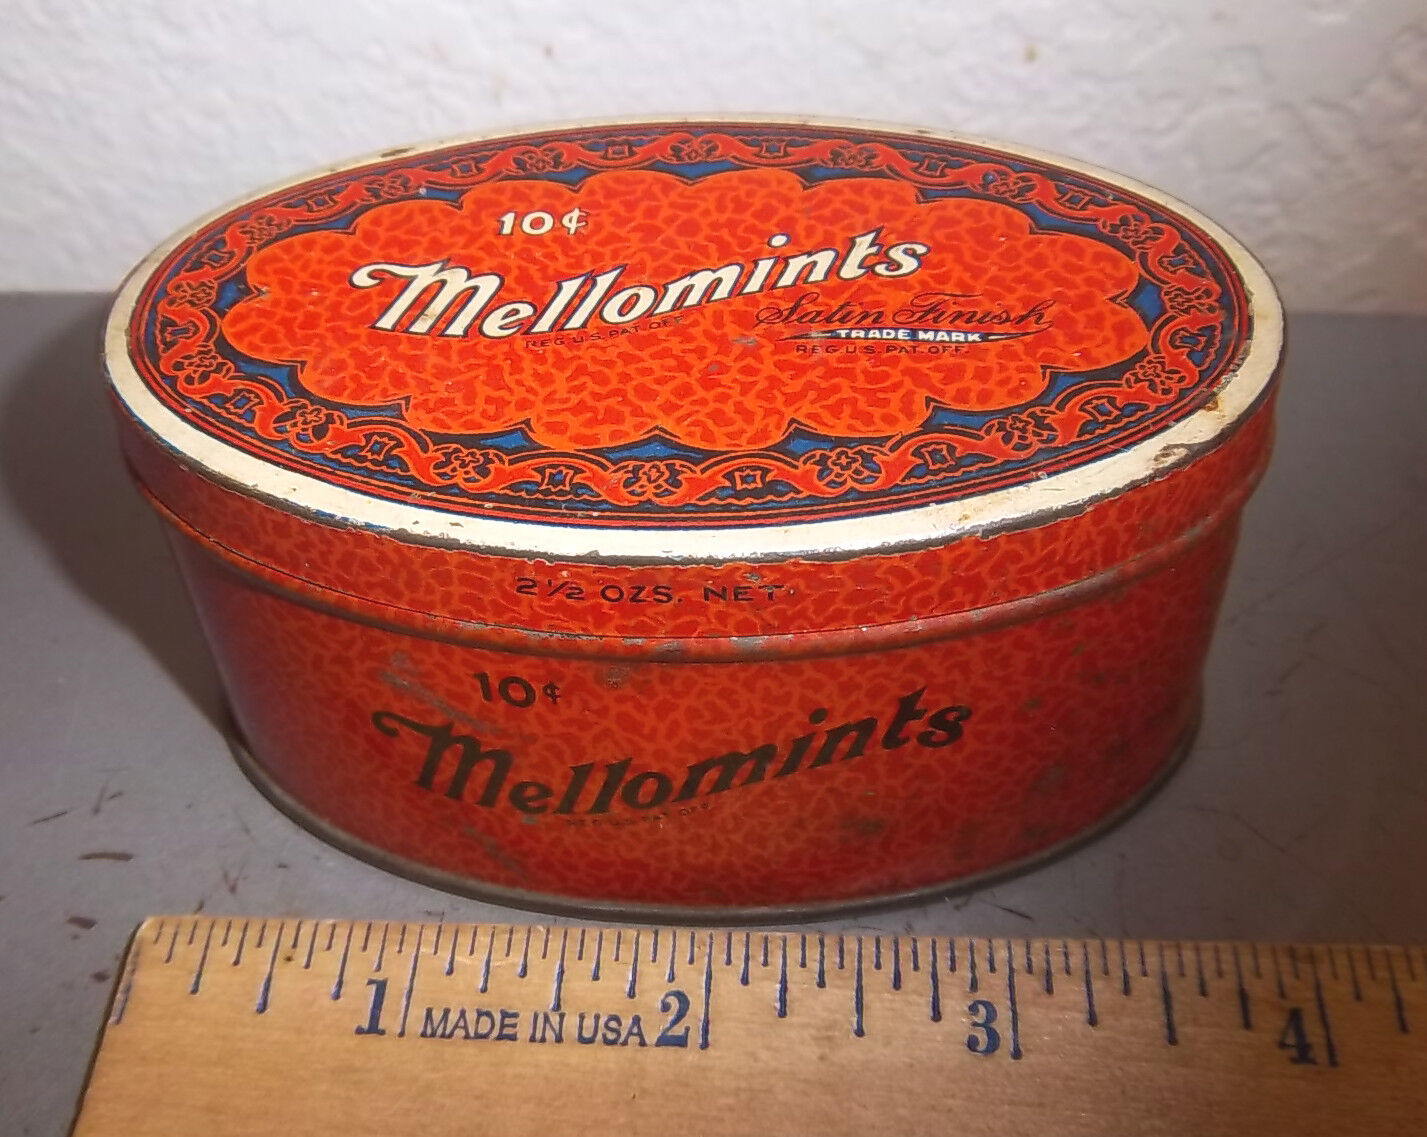 Vintage Mellomints tin, great colors & graphics, Brandle & Smith co. Philly PA